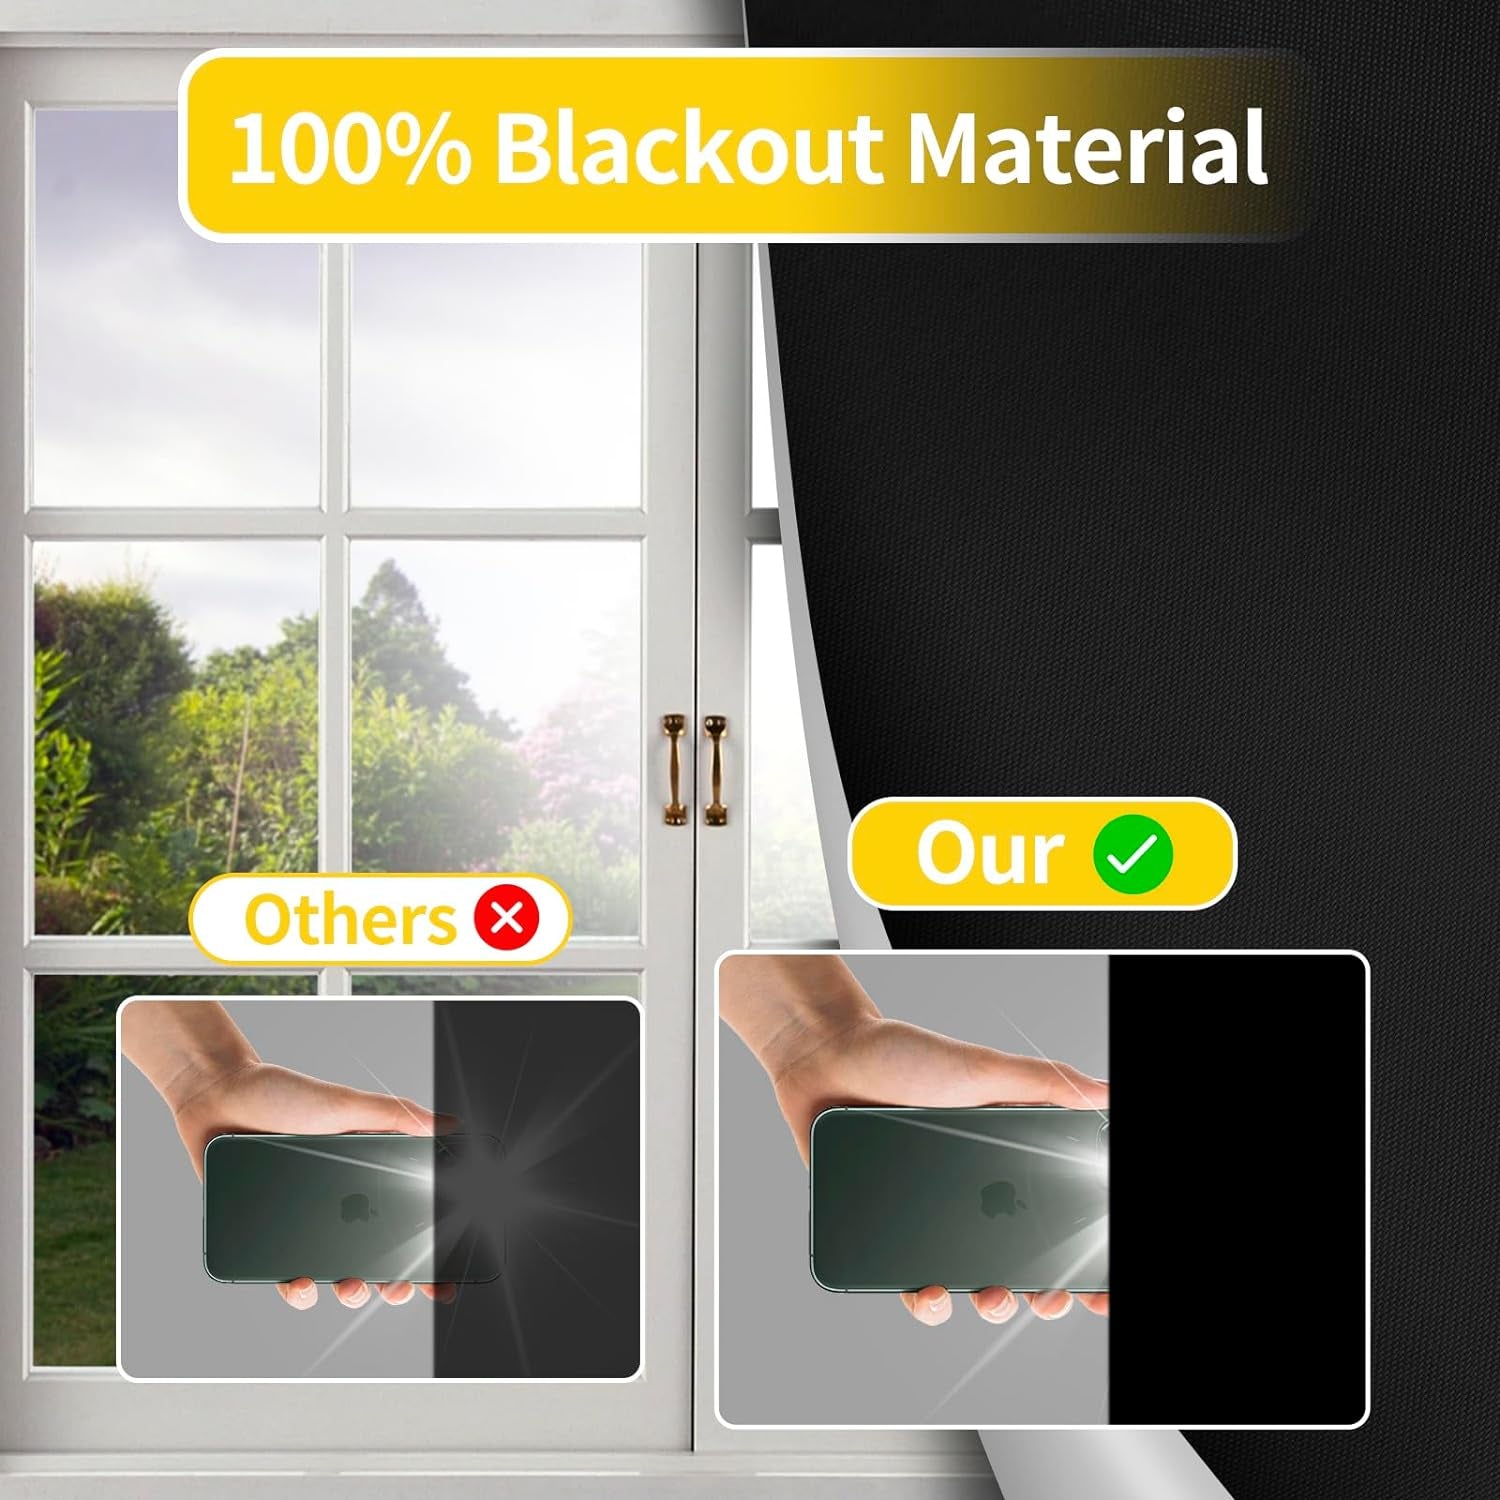 Portable Blackout Curtains, 57"X 39" Blackout Shades for Windows 100% Black Out Temporary Blackout Blinds for Bedroom Baby Nursery Window Travel Dorm Room  YOOMINI   